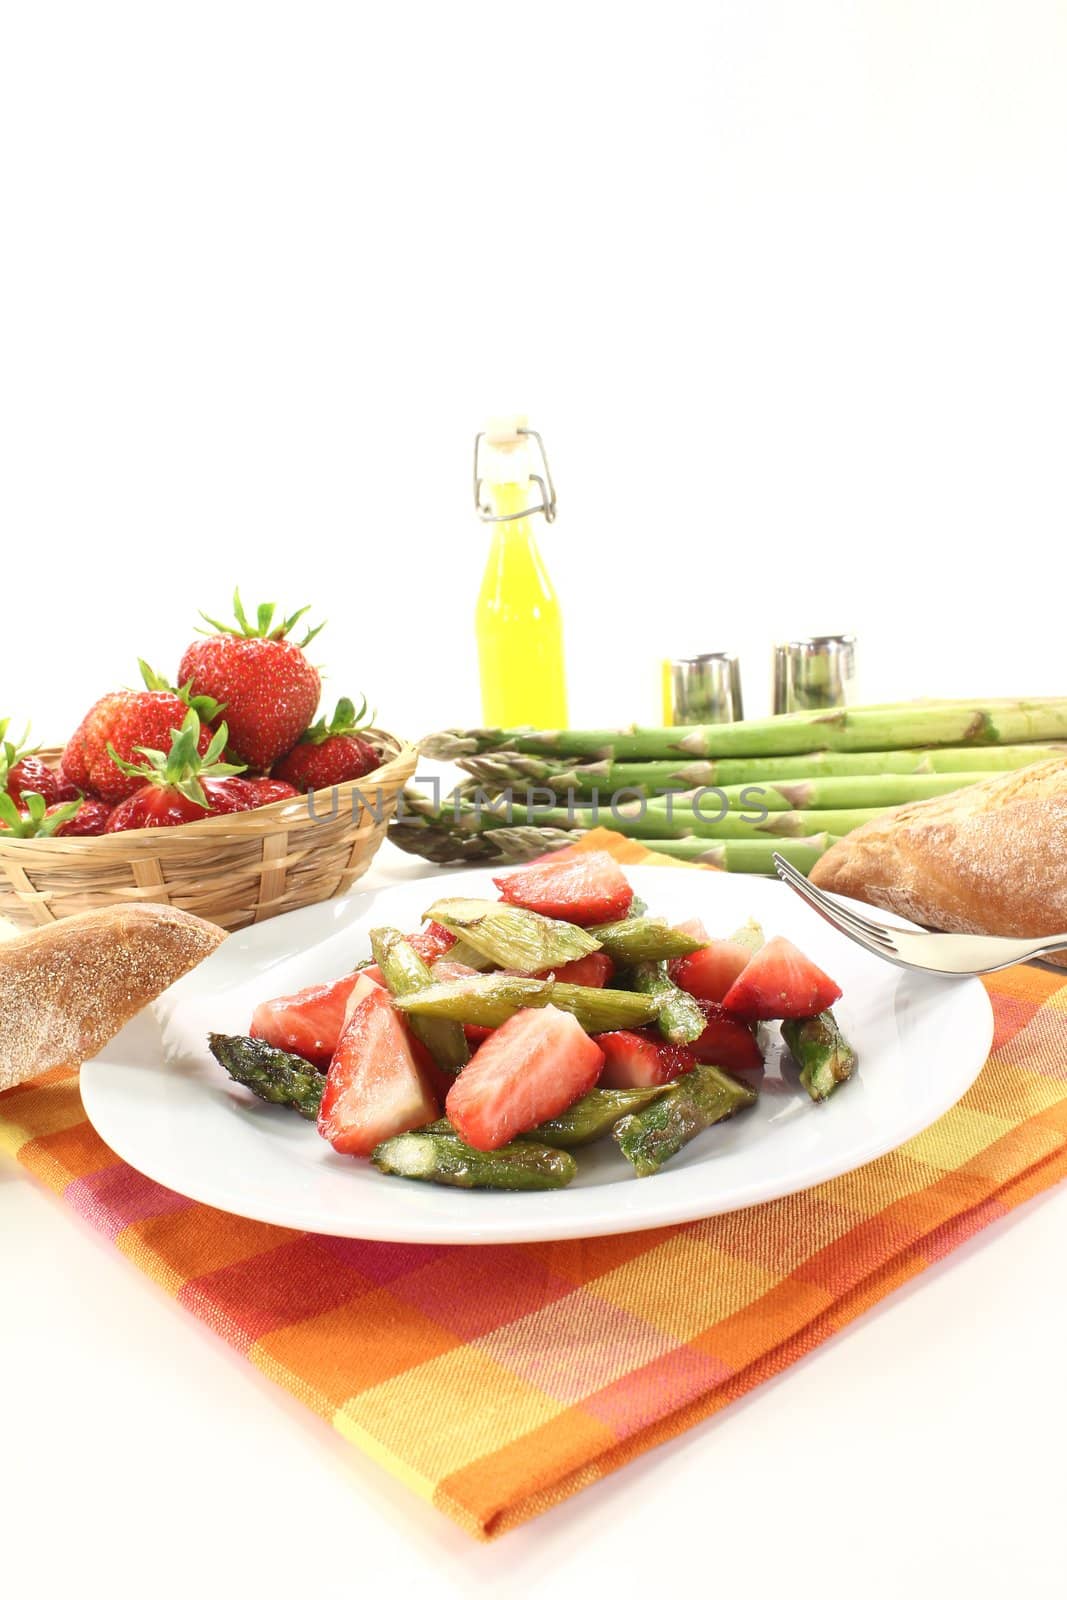 Asparagus salad with fresh strawberries by discovery